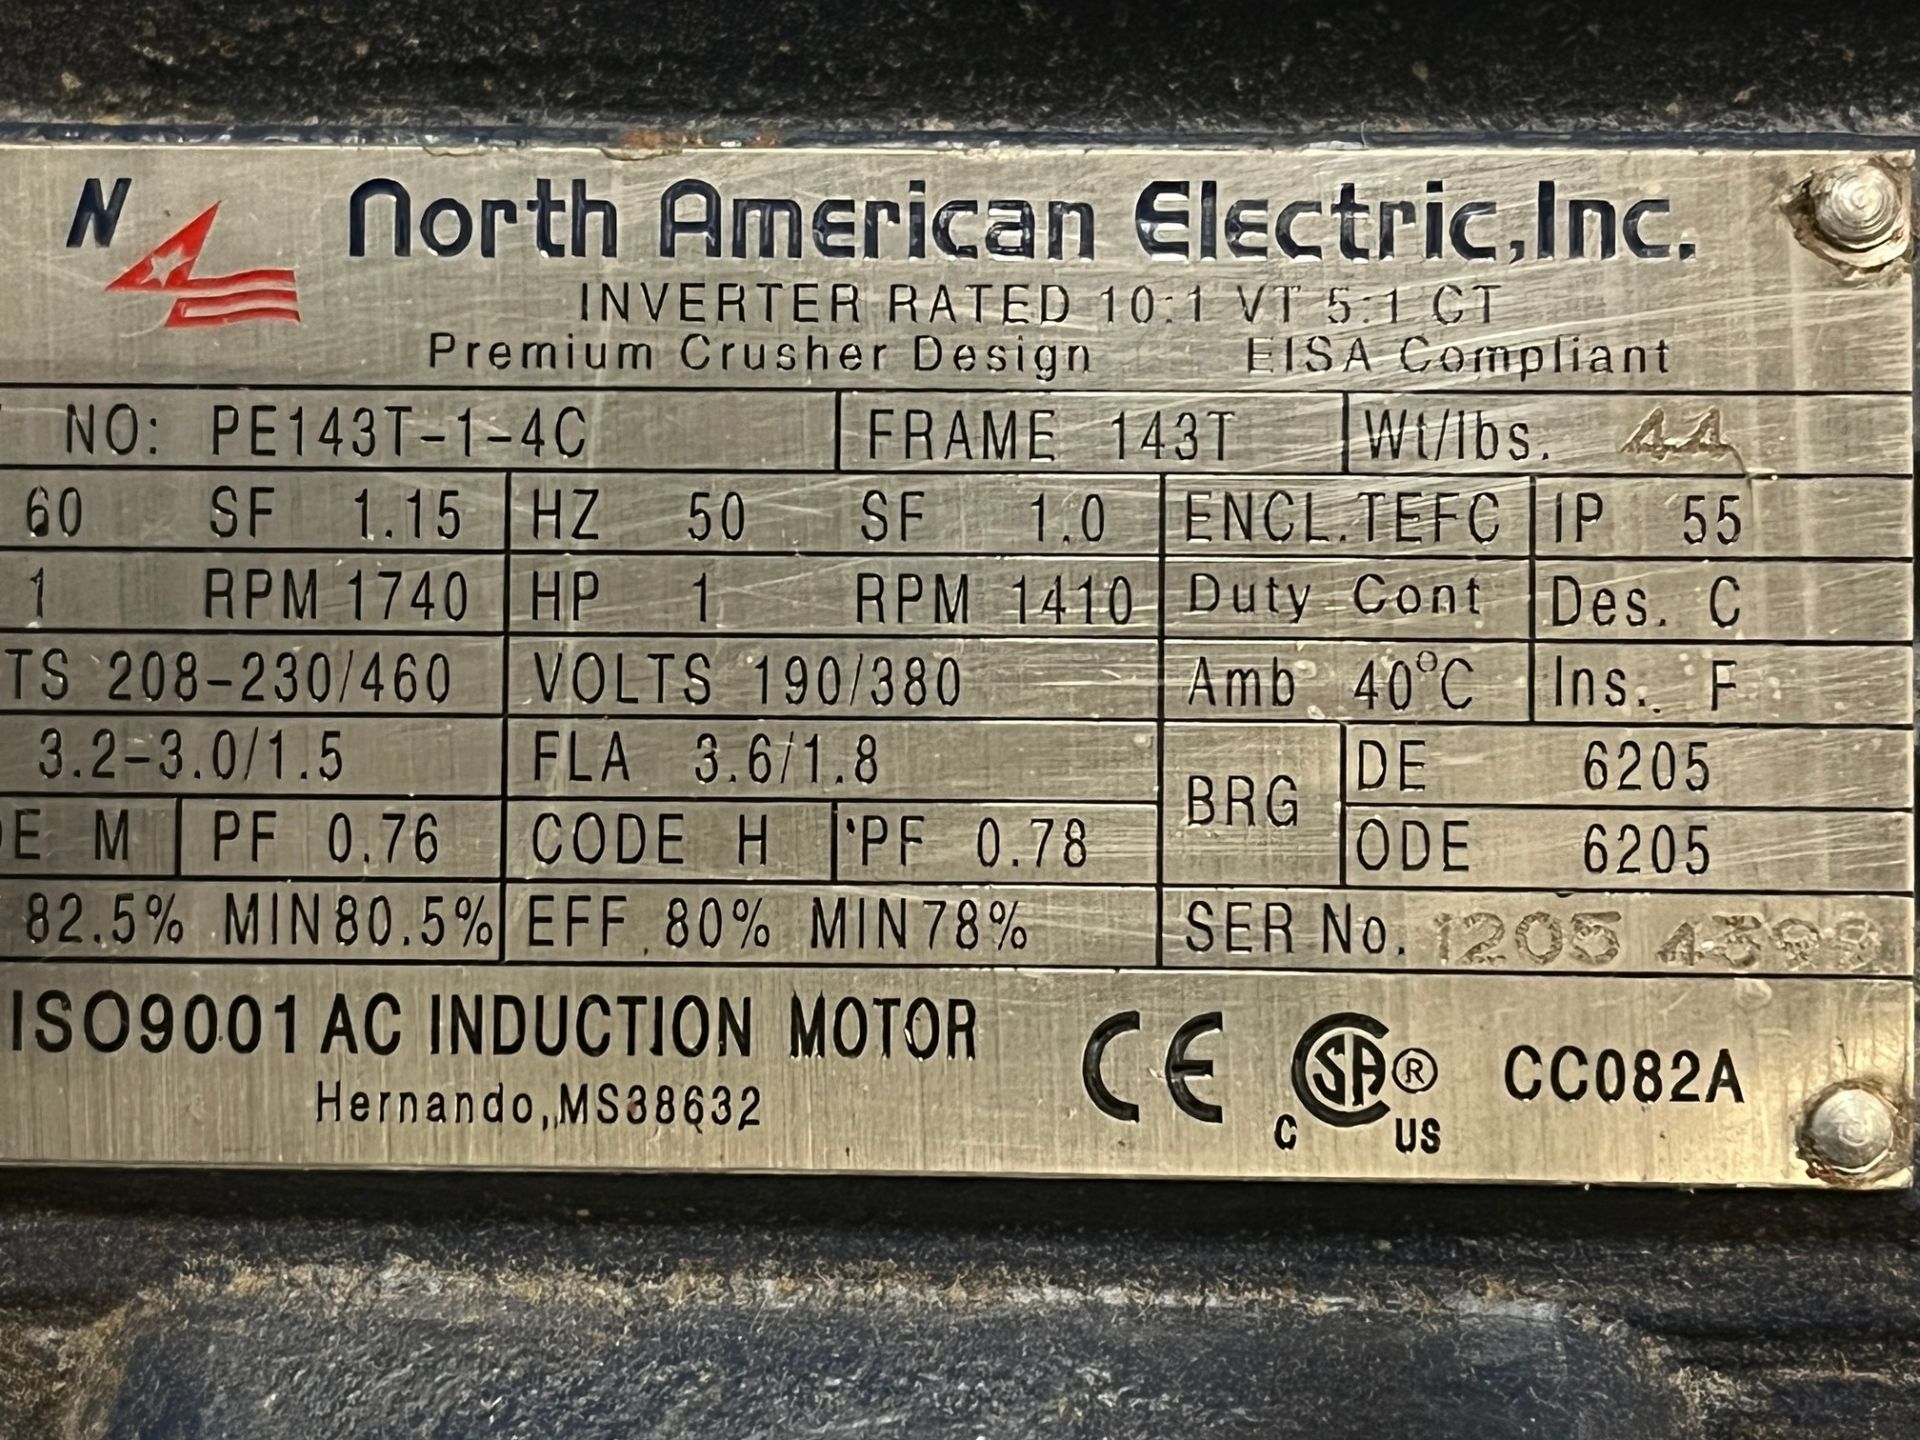 LOT OF (3) NORTH AMERICAN ELECTRIC MOTORS, (2) 2HP, (1) 1HP, 1,740 / 3,500 RPM, 208-230/460V, - Image 3 of 4